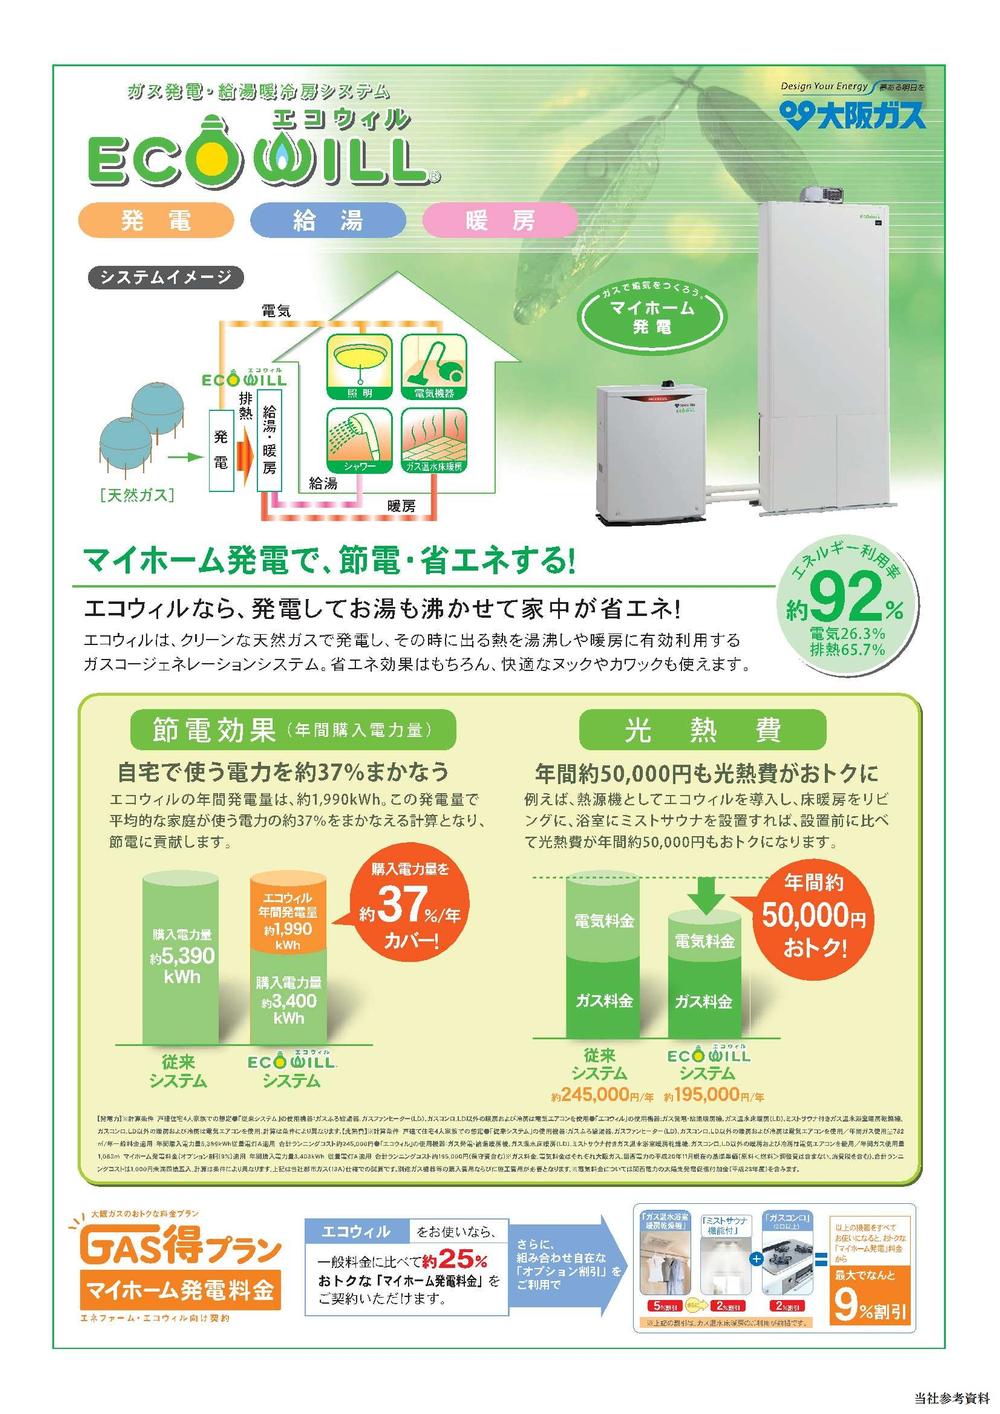 Power generation ・ Hot water equipment. Gas Power ・ Hot water heating and cooling systems: You can use without waste eco Will energy ☆ 